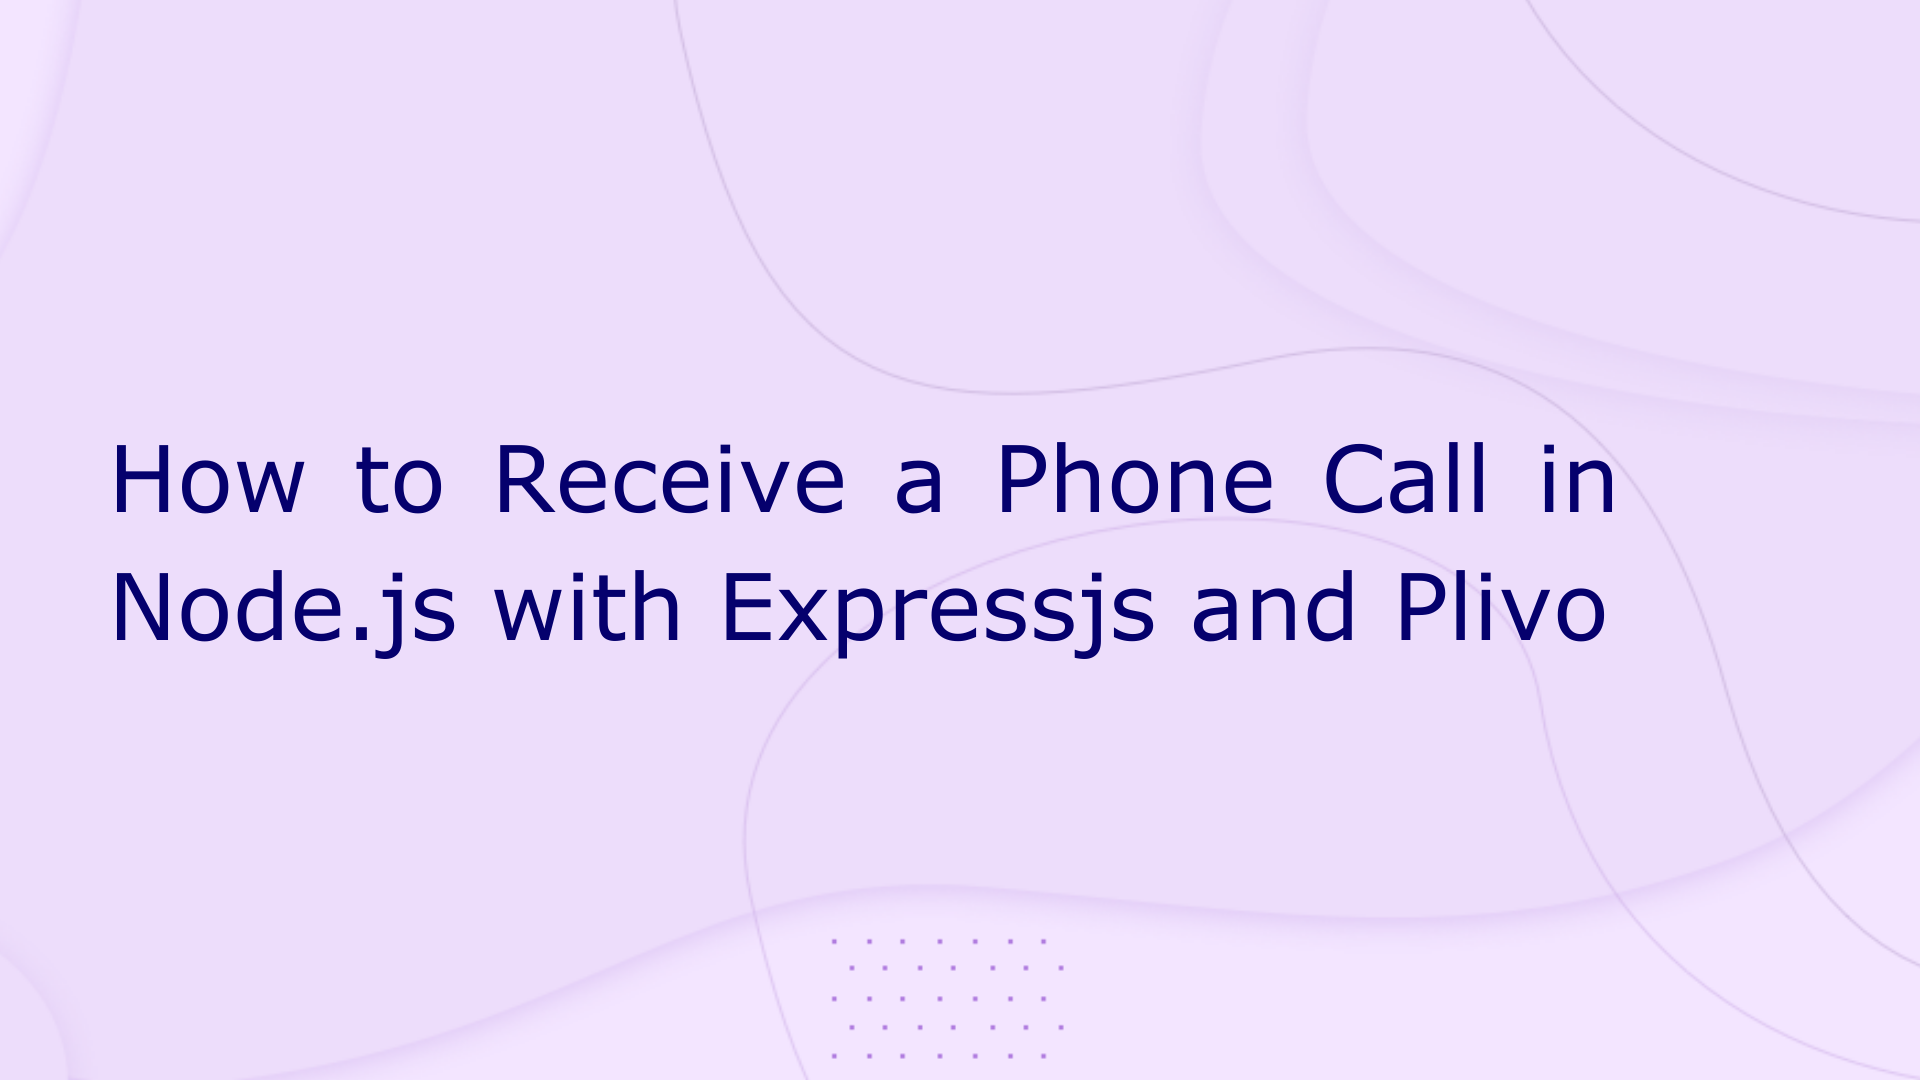 How to Receive a Phone Call in Node.js with Expressjs and Plivo